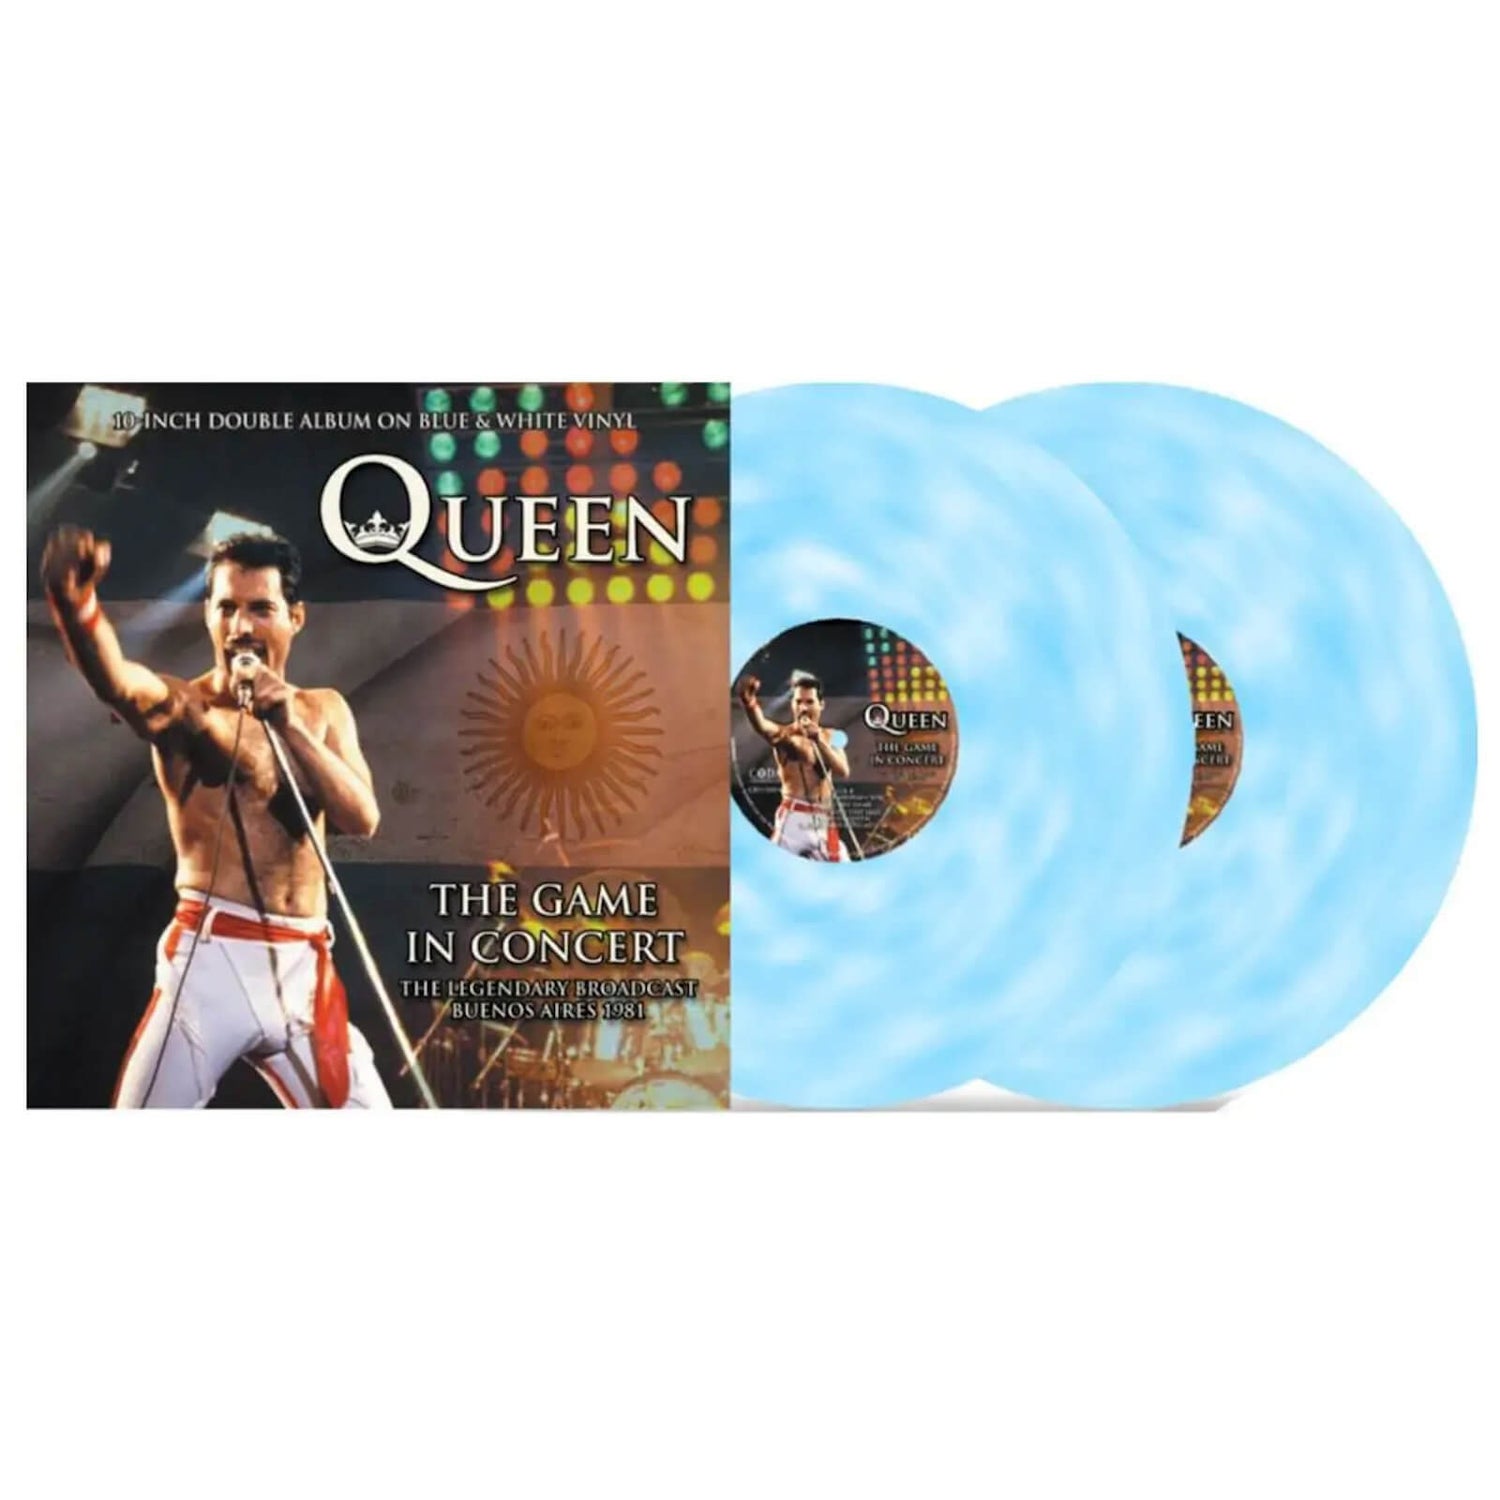 Queen - The Game In Concert (Blue & White Vinyl) 2x10"